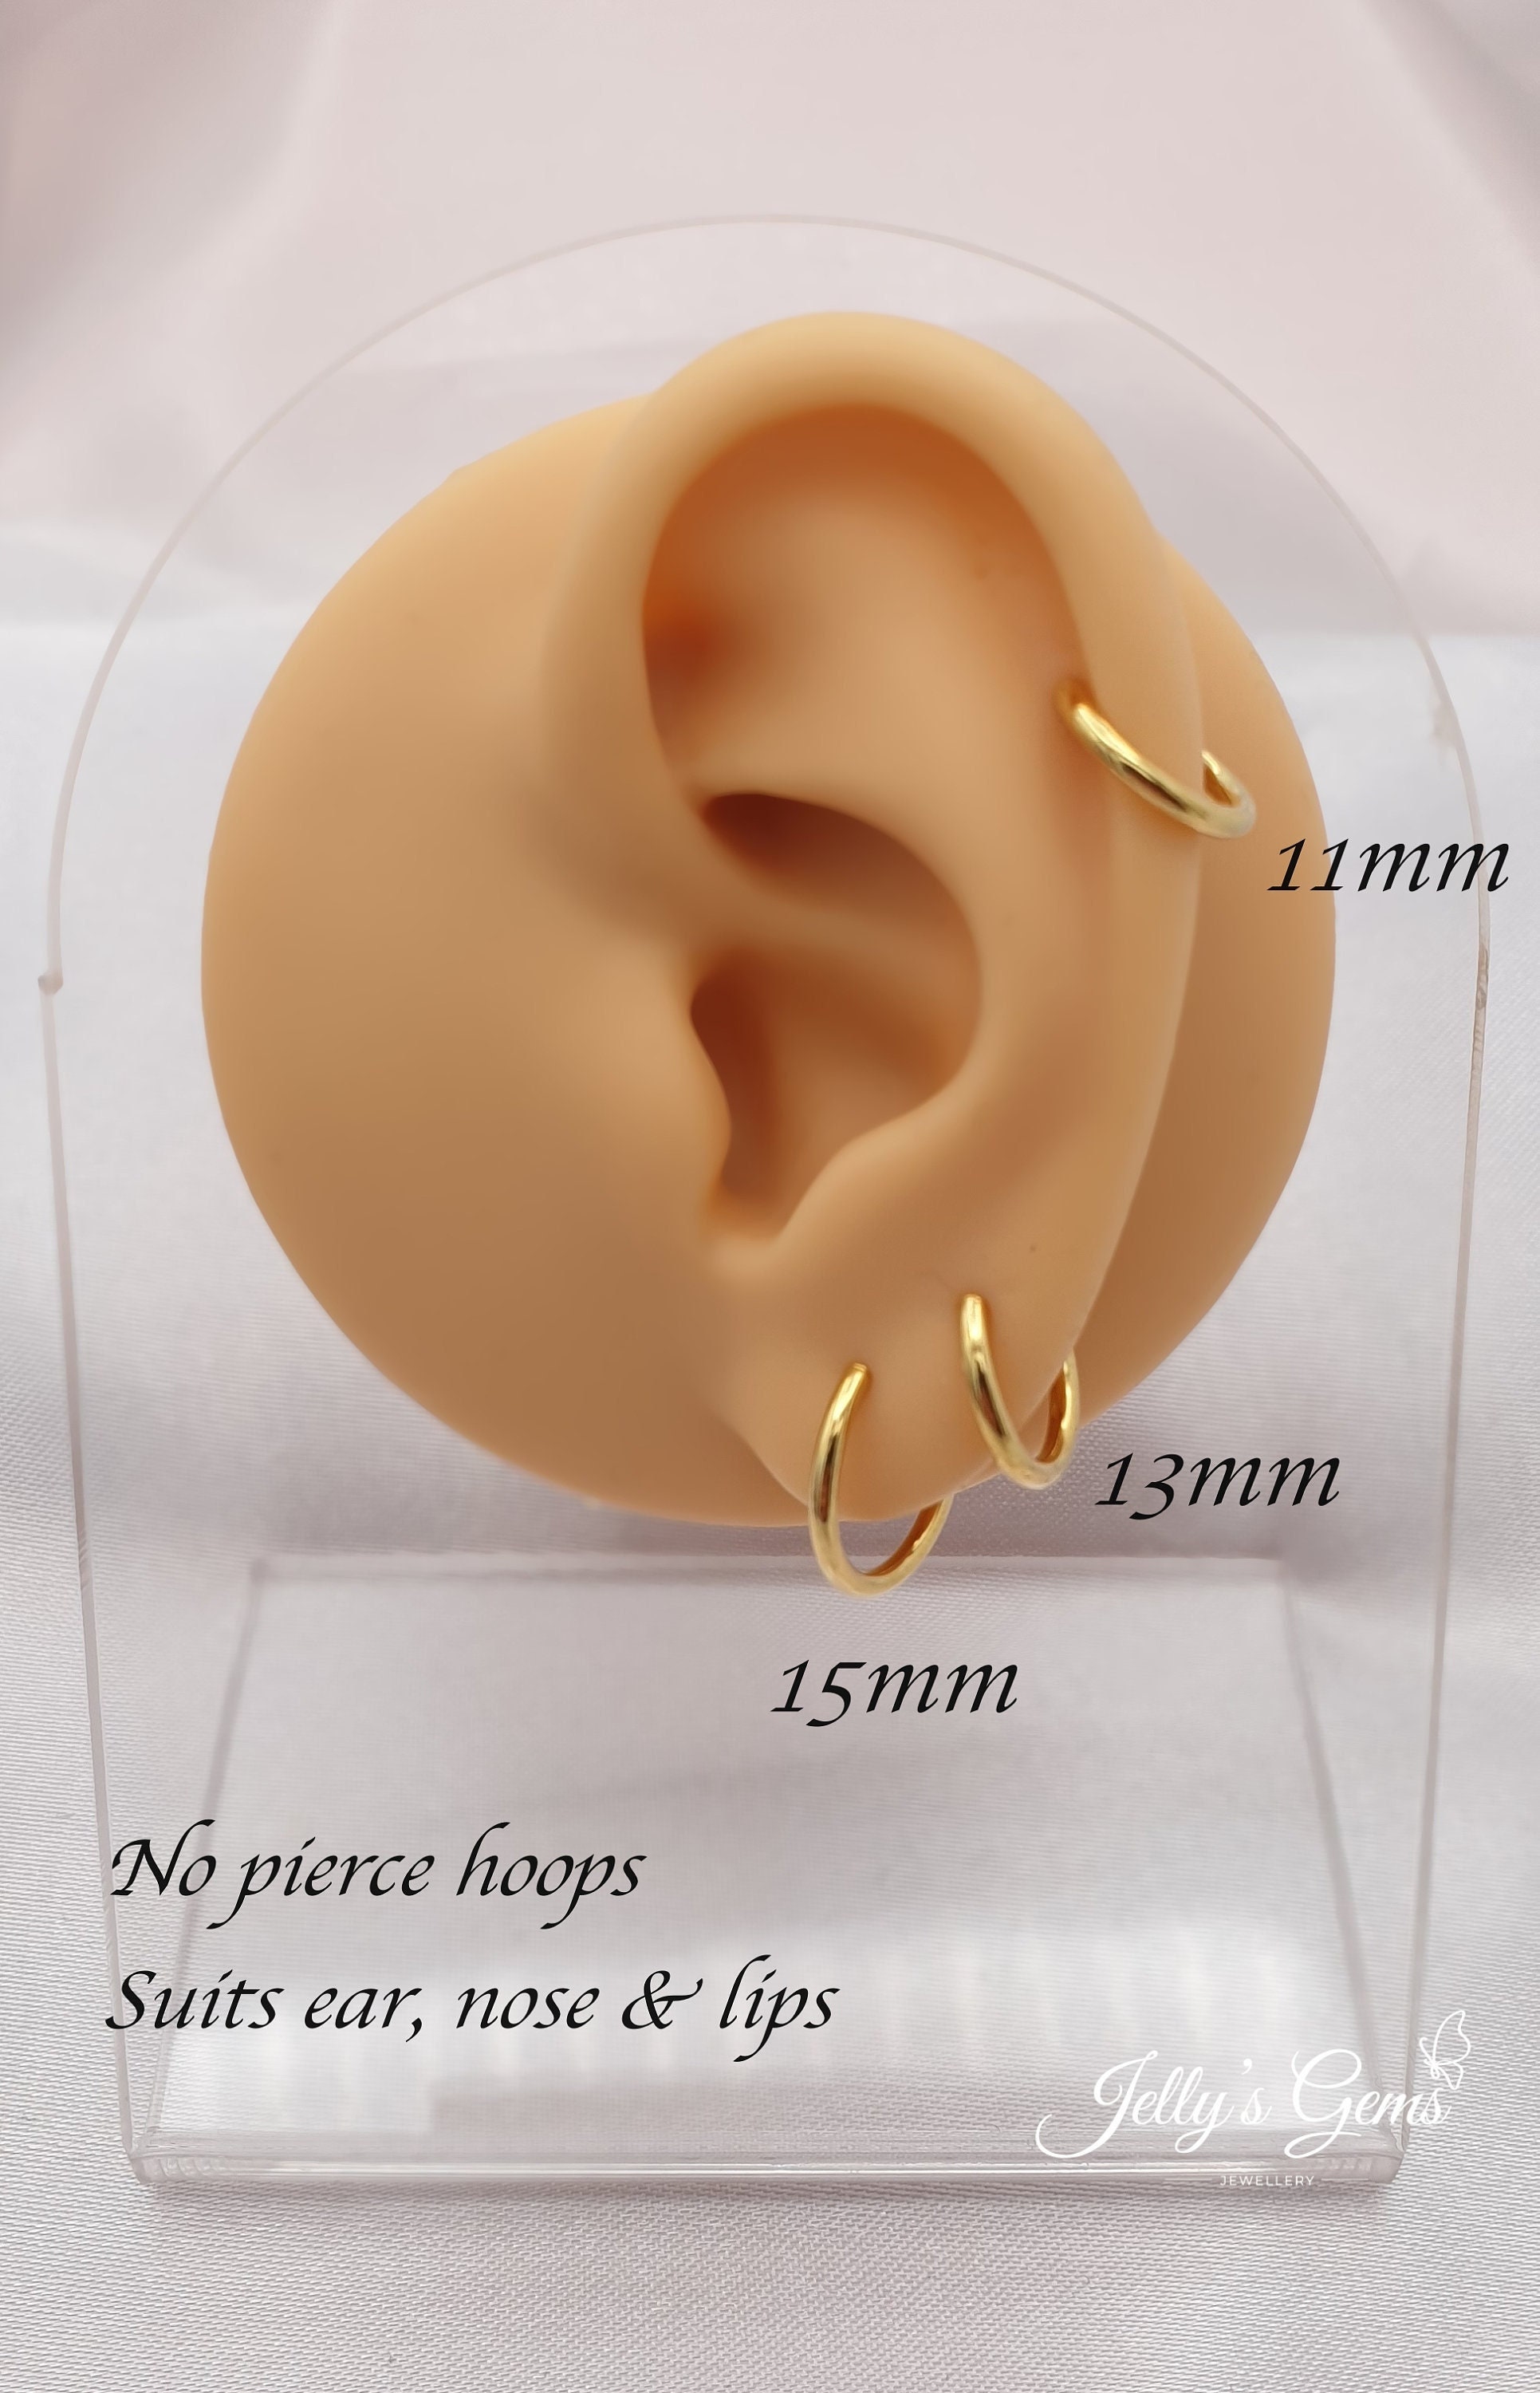 Cheap Acupressure Slimming Earrings Non-piercing Scratch-resistant  Ergonomical Design Magnetic Earrings For Weight Loss | Joom